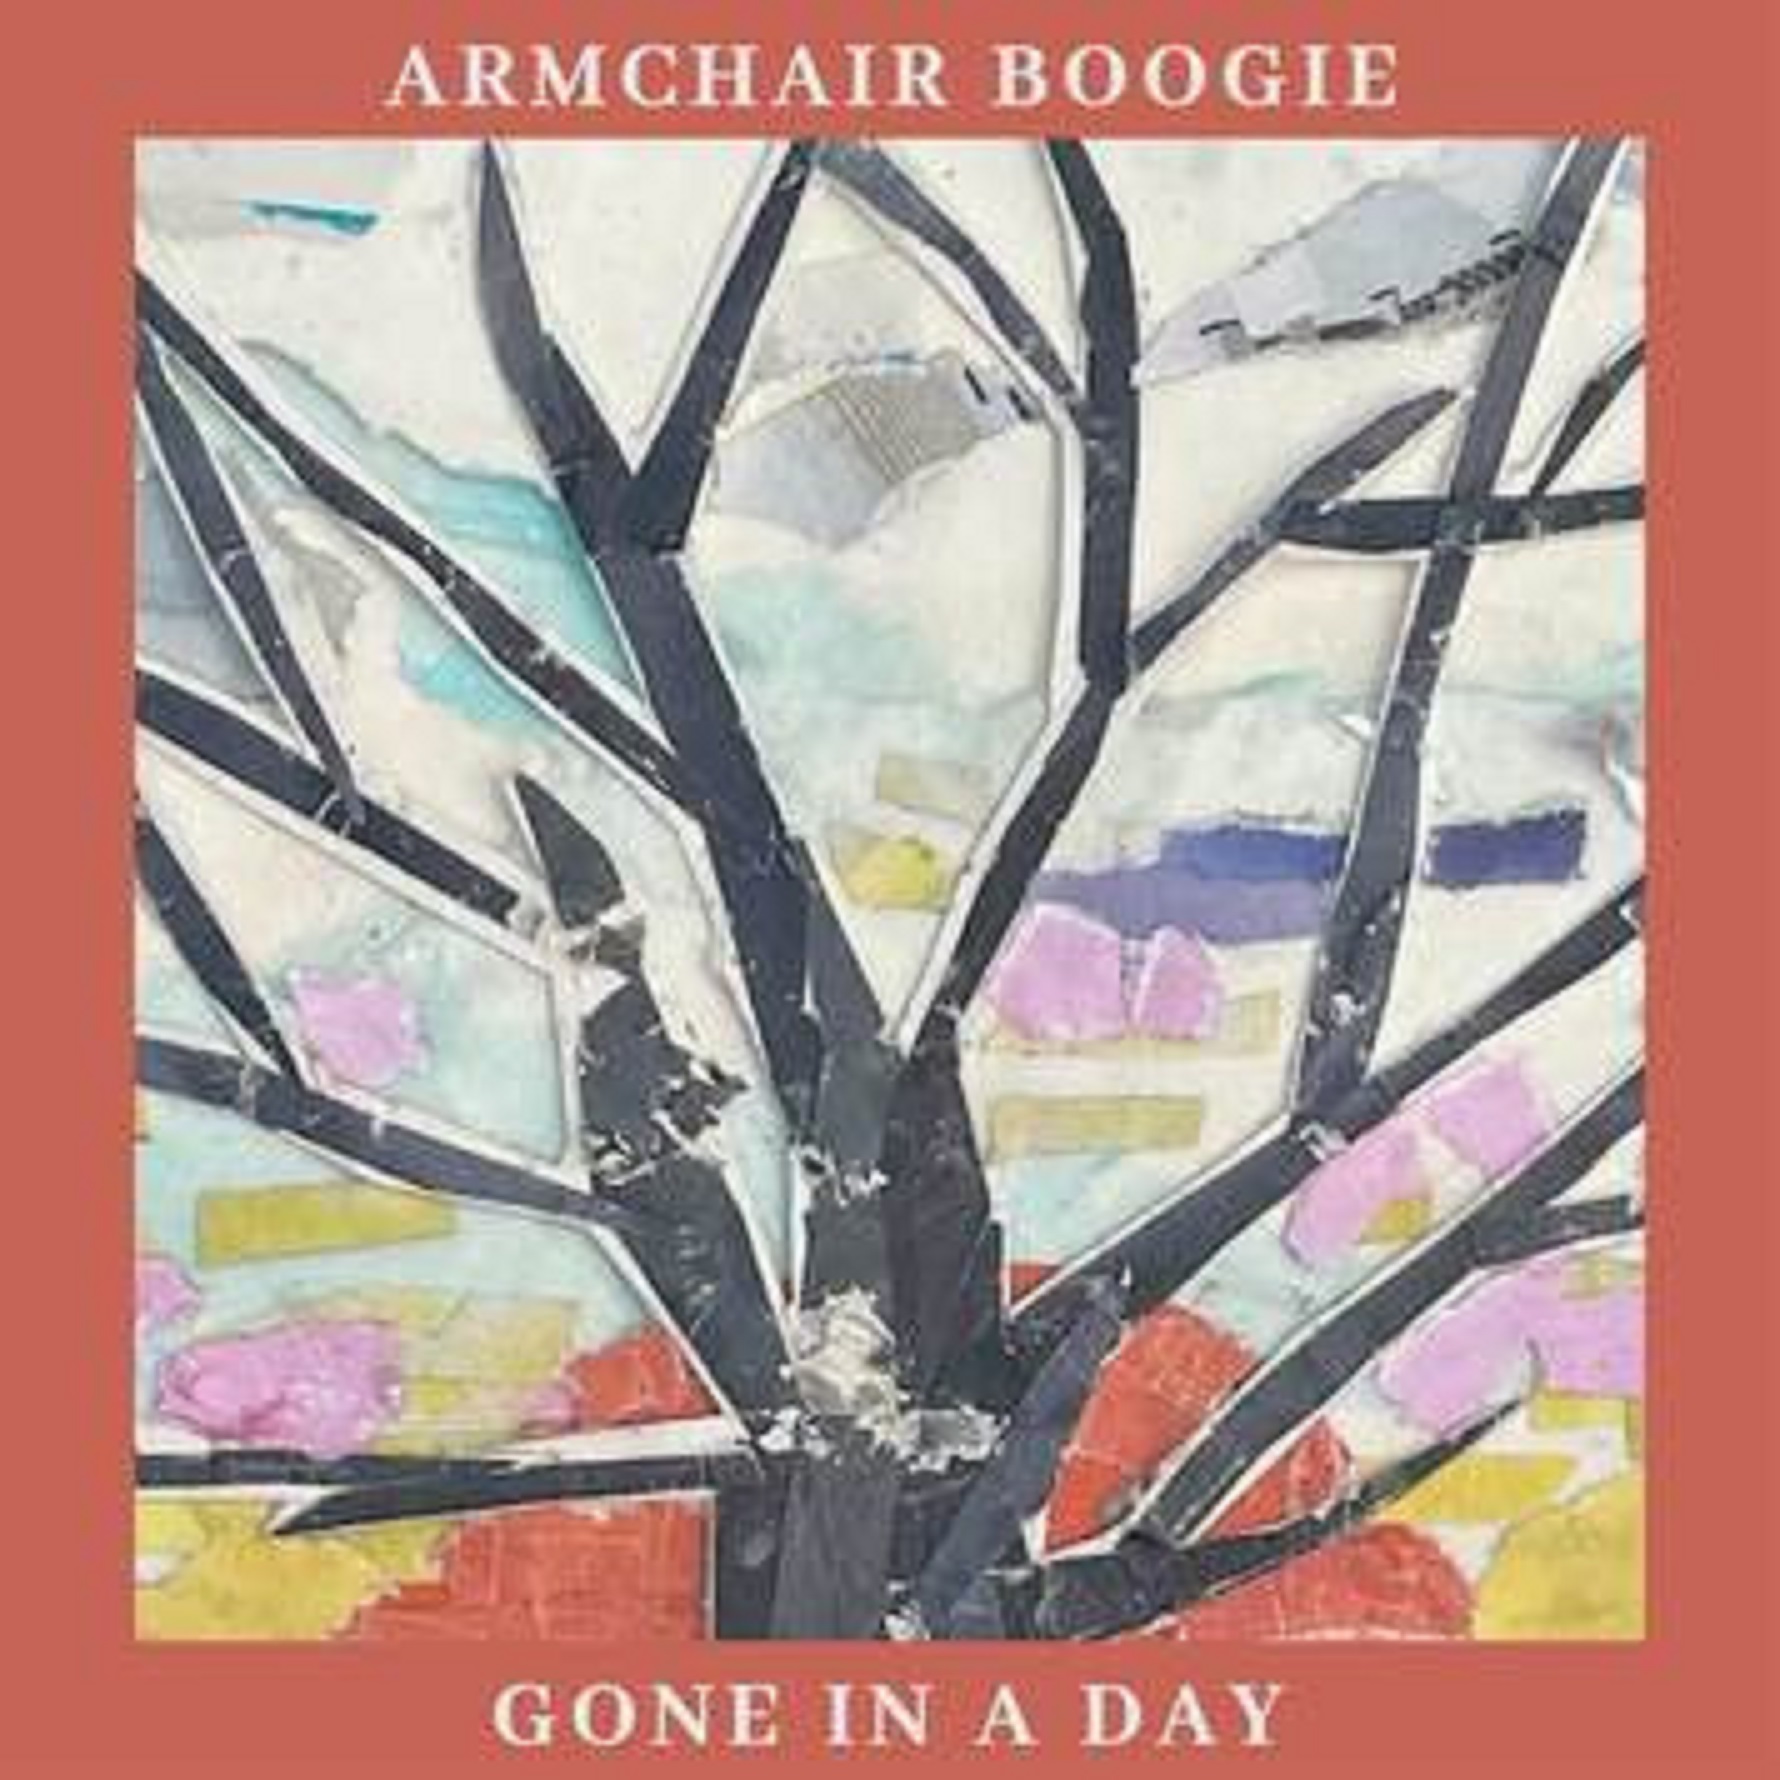 Armchair Boogie Release “Gone in a Day” Single, Further Tour Dates